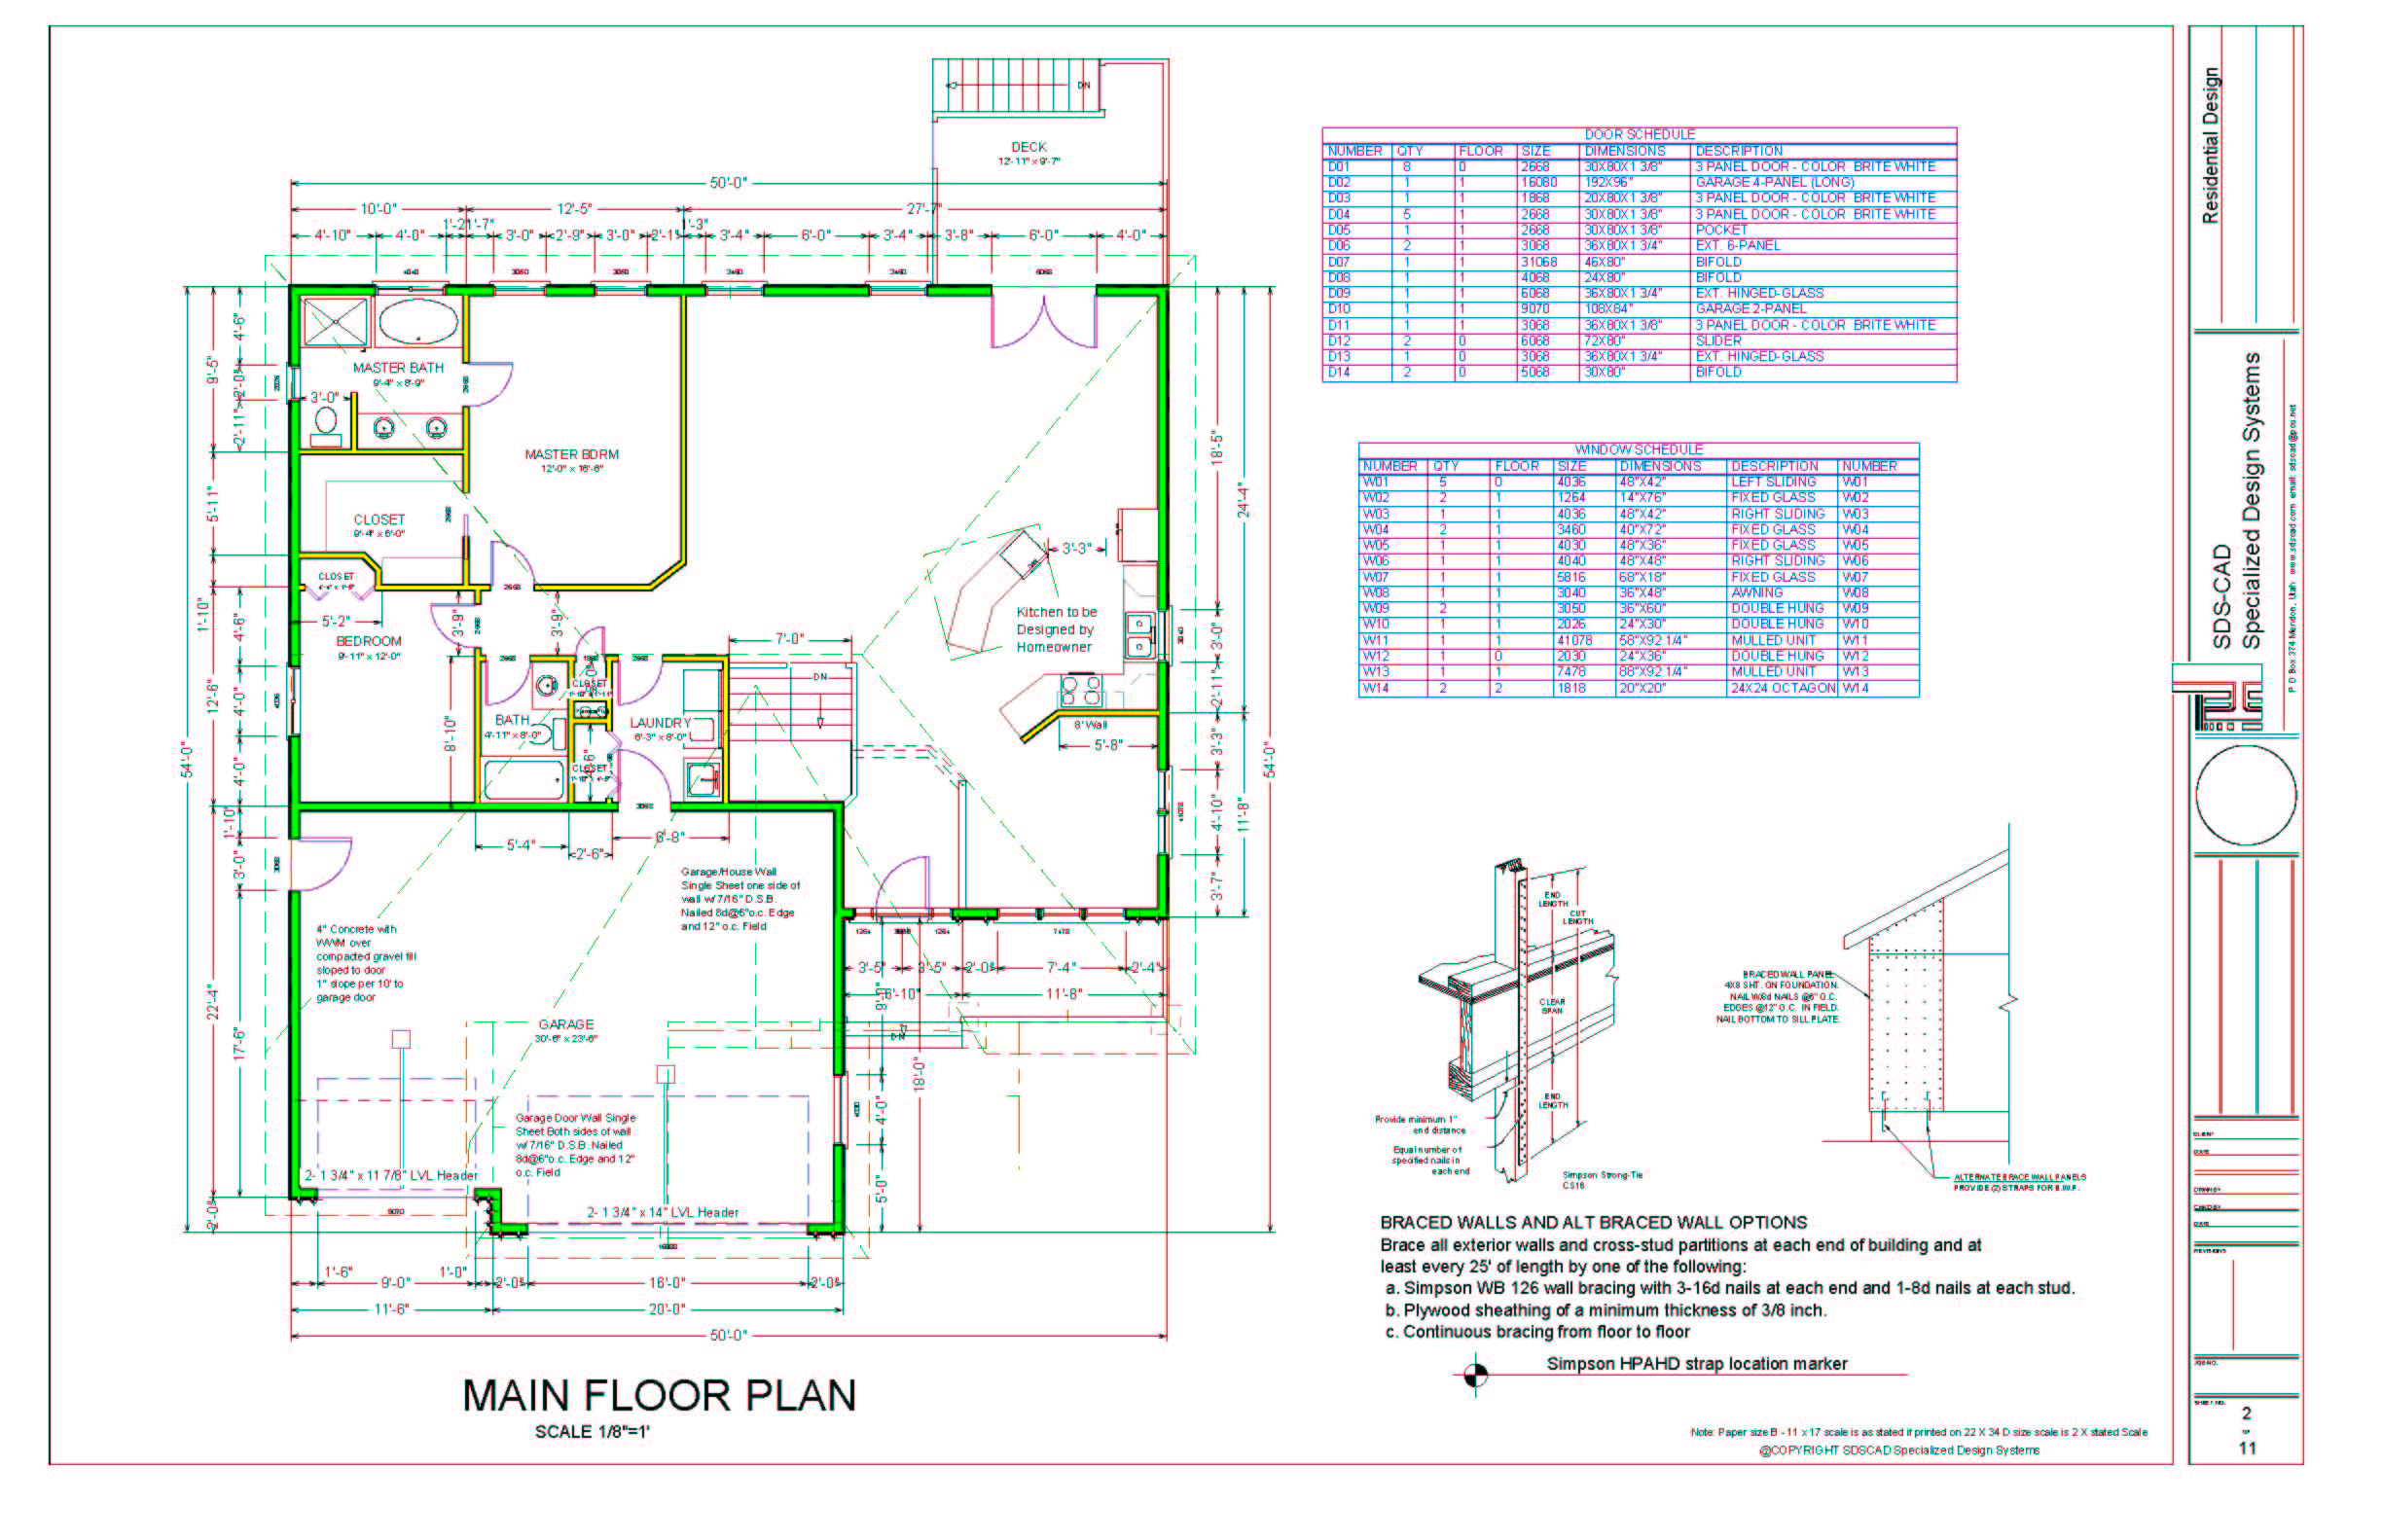 and PDF files for Custom Home House Plan 3,452 SF Blueprint Plans CAD DWG 